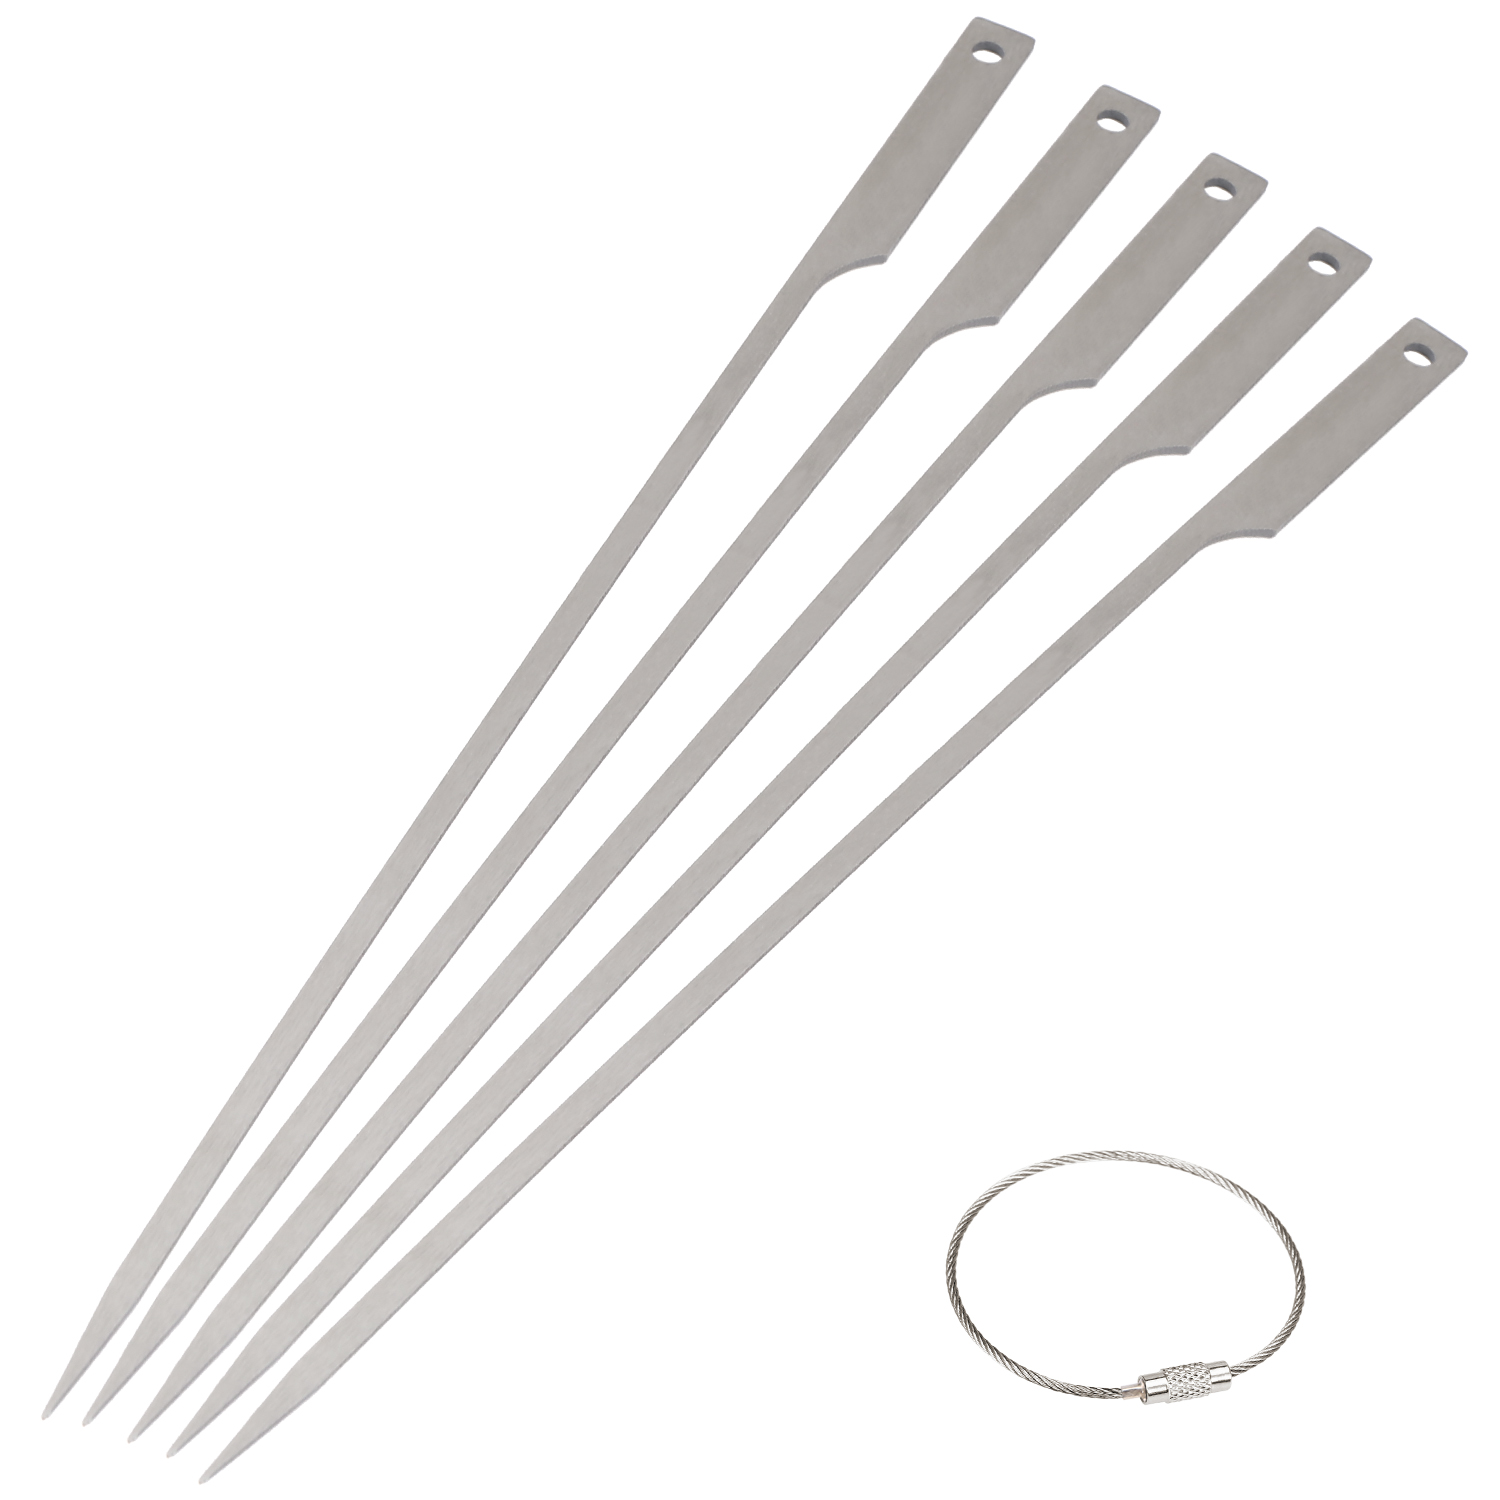 Lixada 5pcs 10 Inch Flat Barbecue Skewers Backyard Picnic BBQ Grilling Kabob Skewers BBQ Sticks with Wire Ring - image 4 of 7